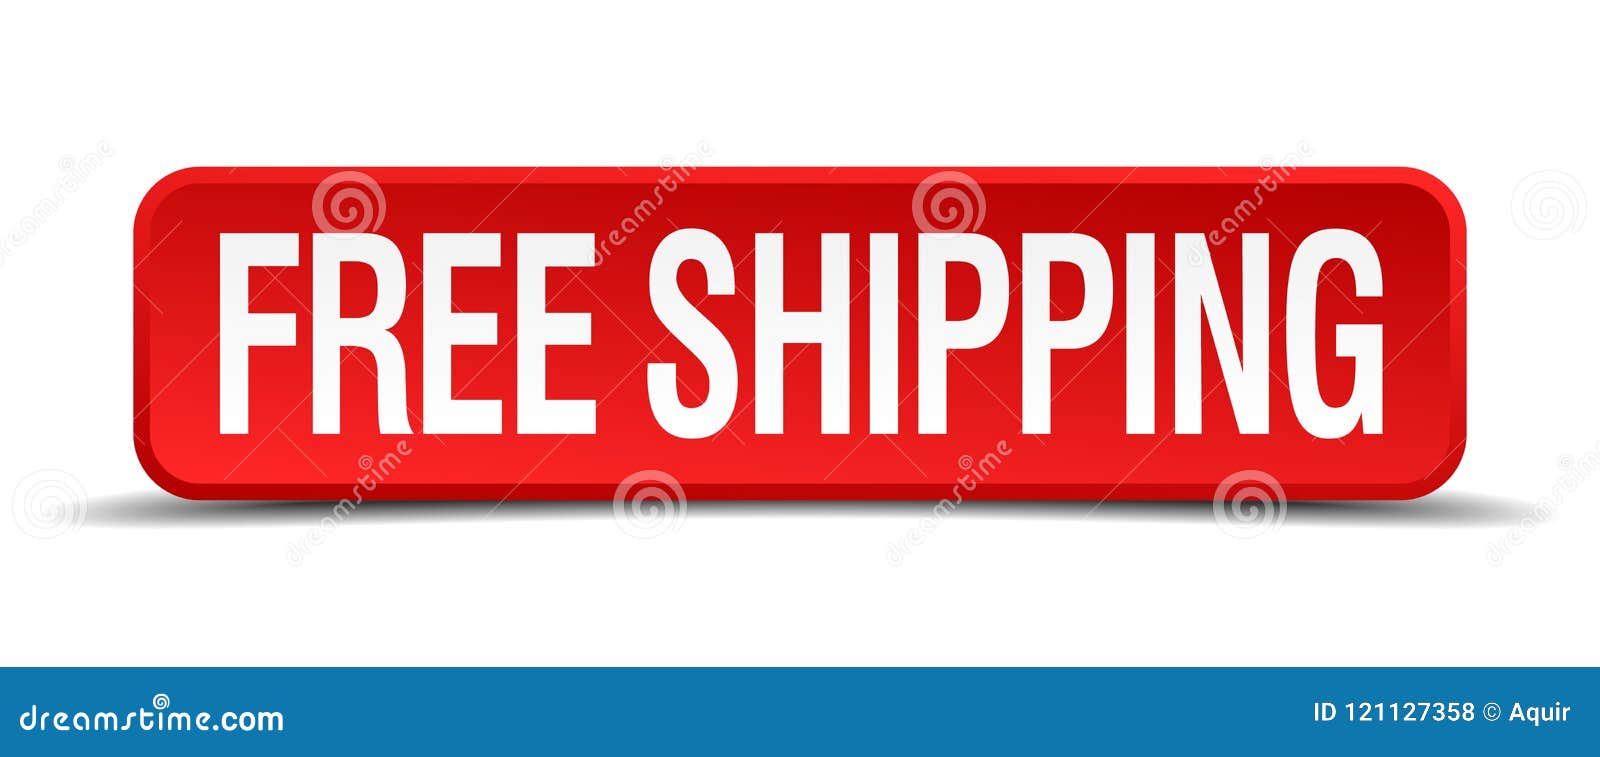 Free shipping button stock vector. Illustration of shiny - 121127358